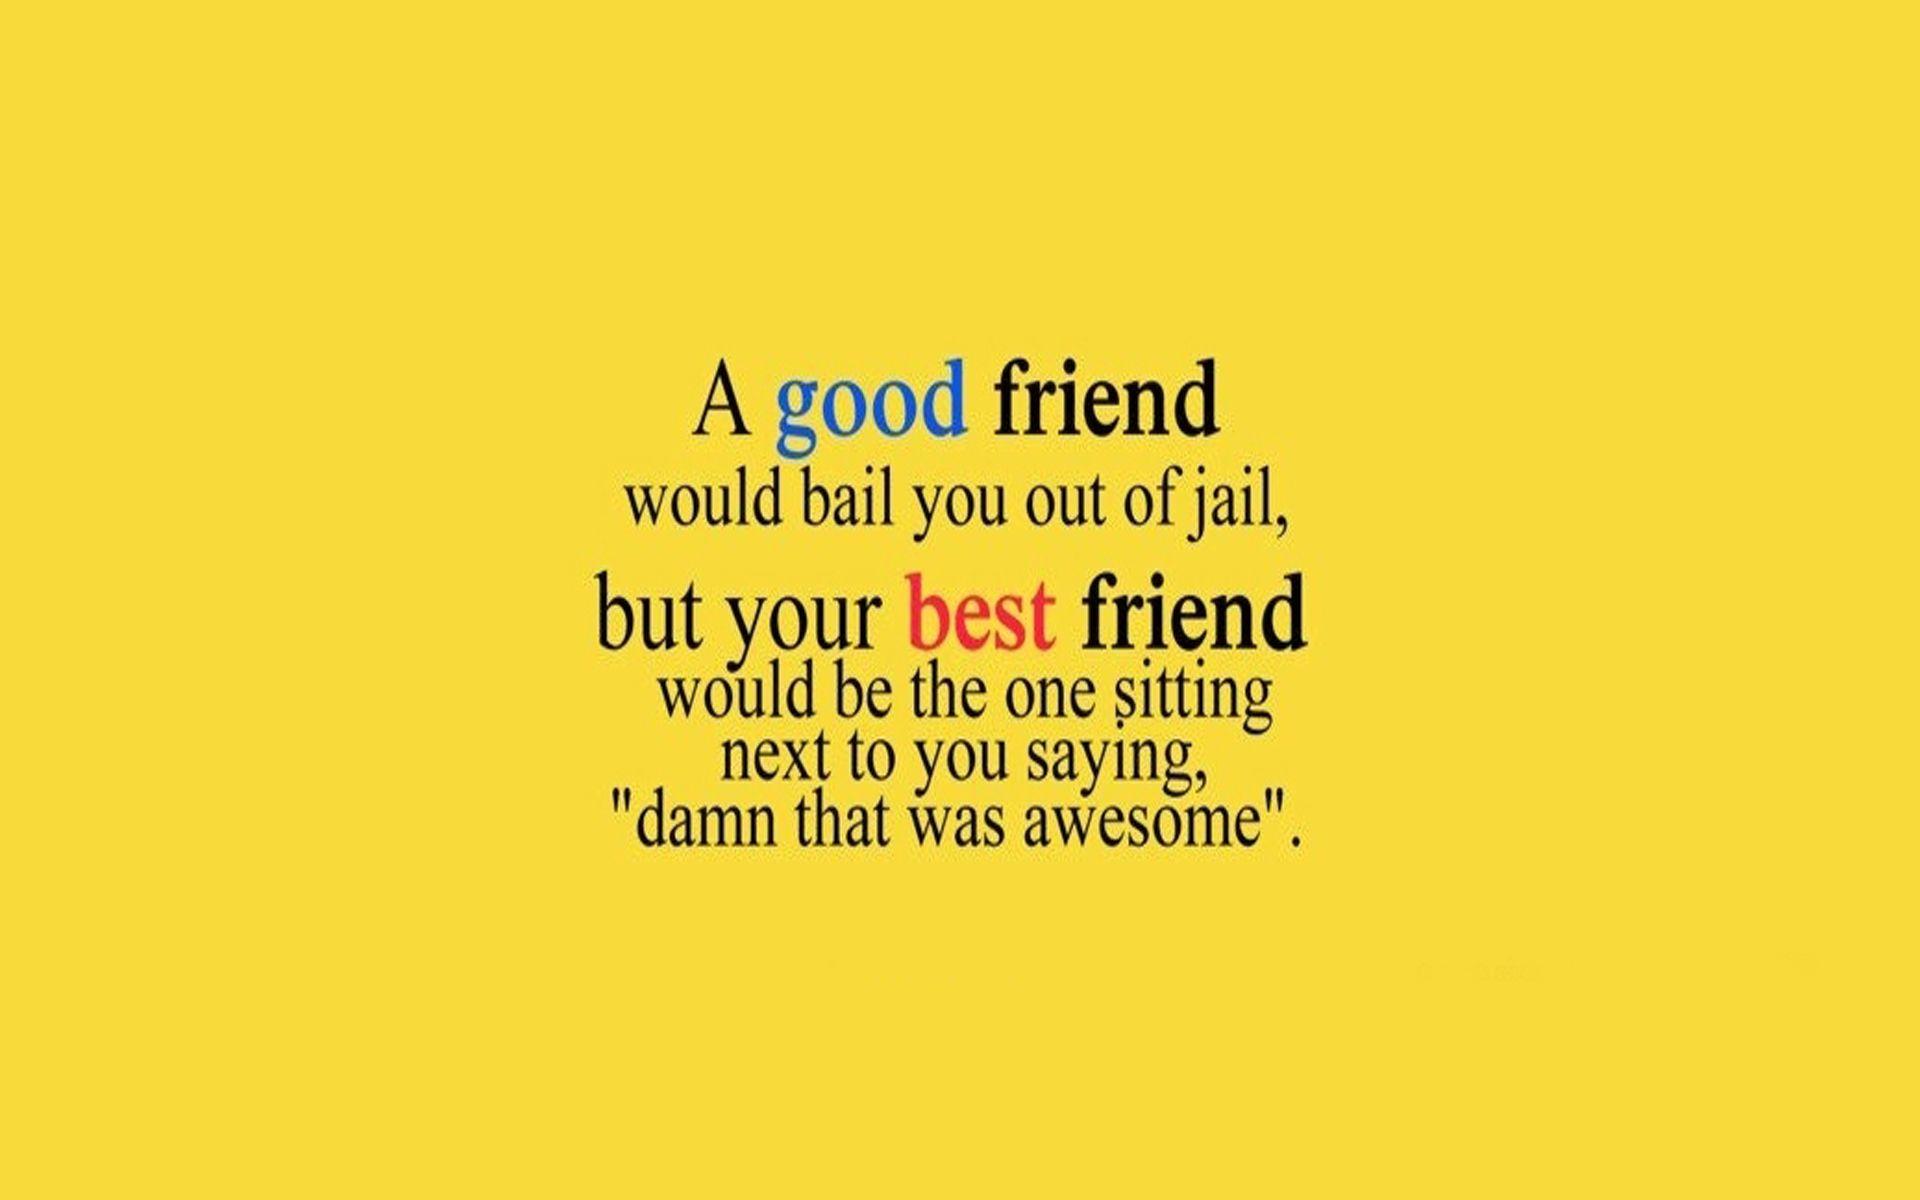 Cute Friendship Quotes With Image. Friendship wallpaper -Chobirdokan